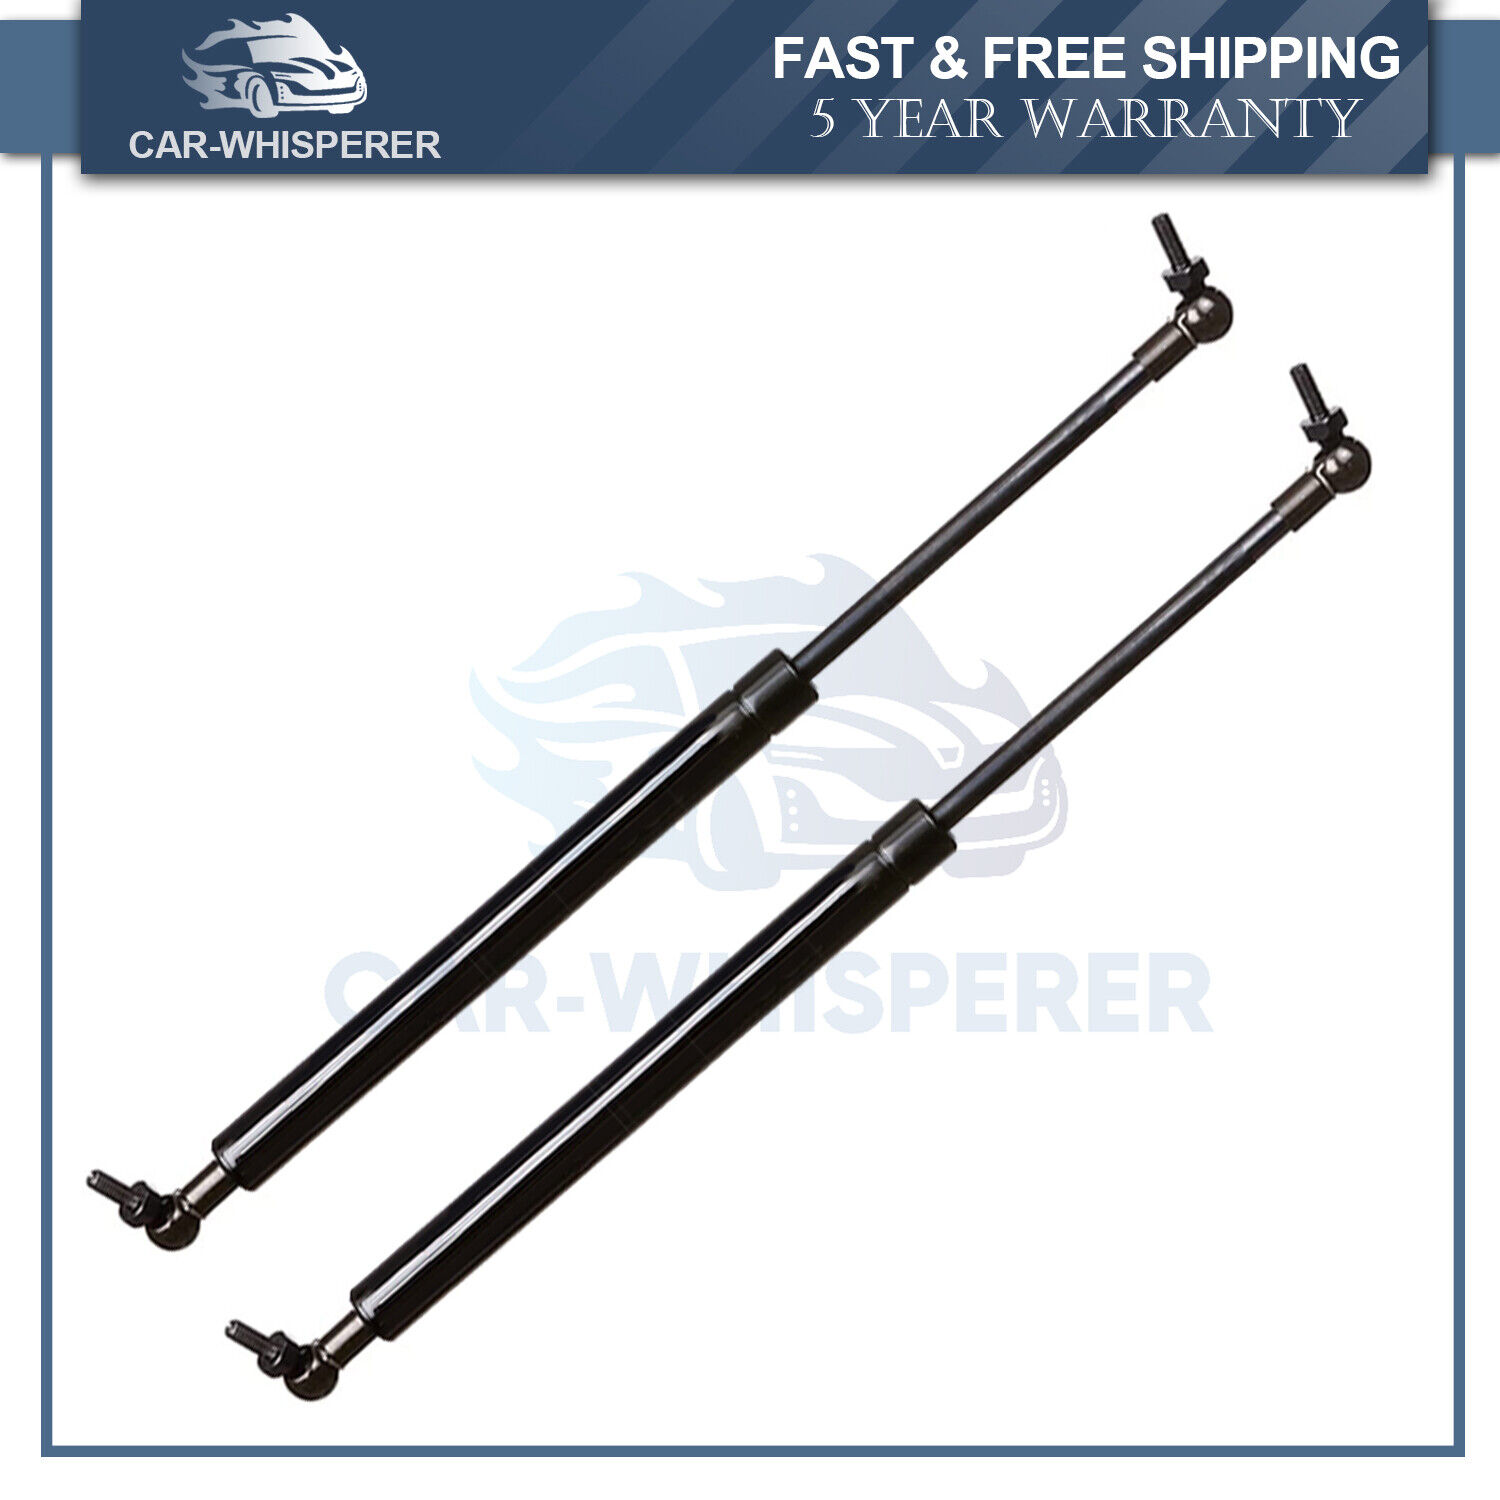 2Pcs For Dodge Durango 1998-2003 Rear Liftgate Lift Supports Gas Springs Hatch